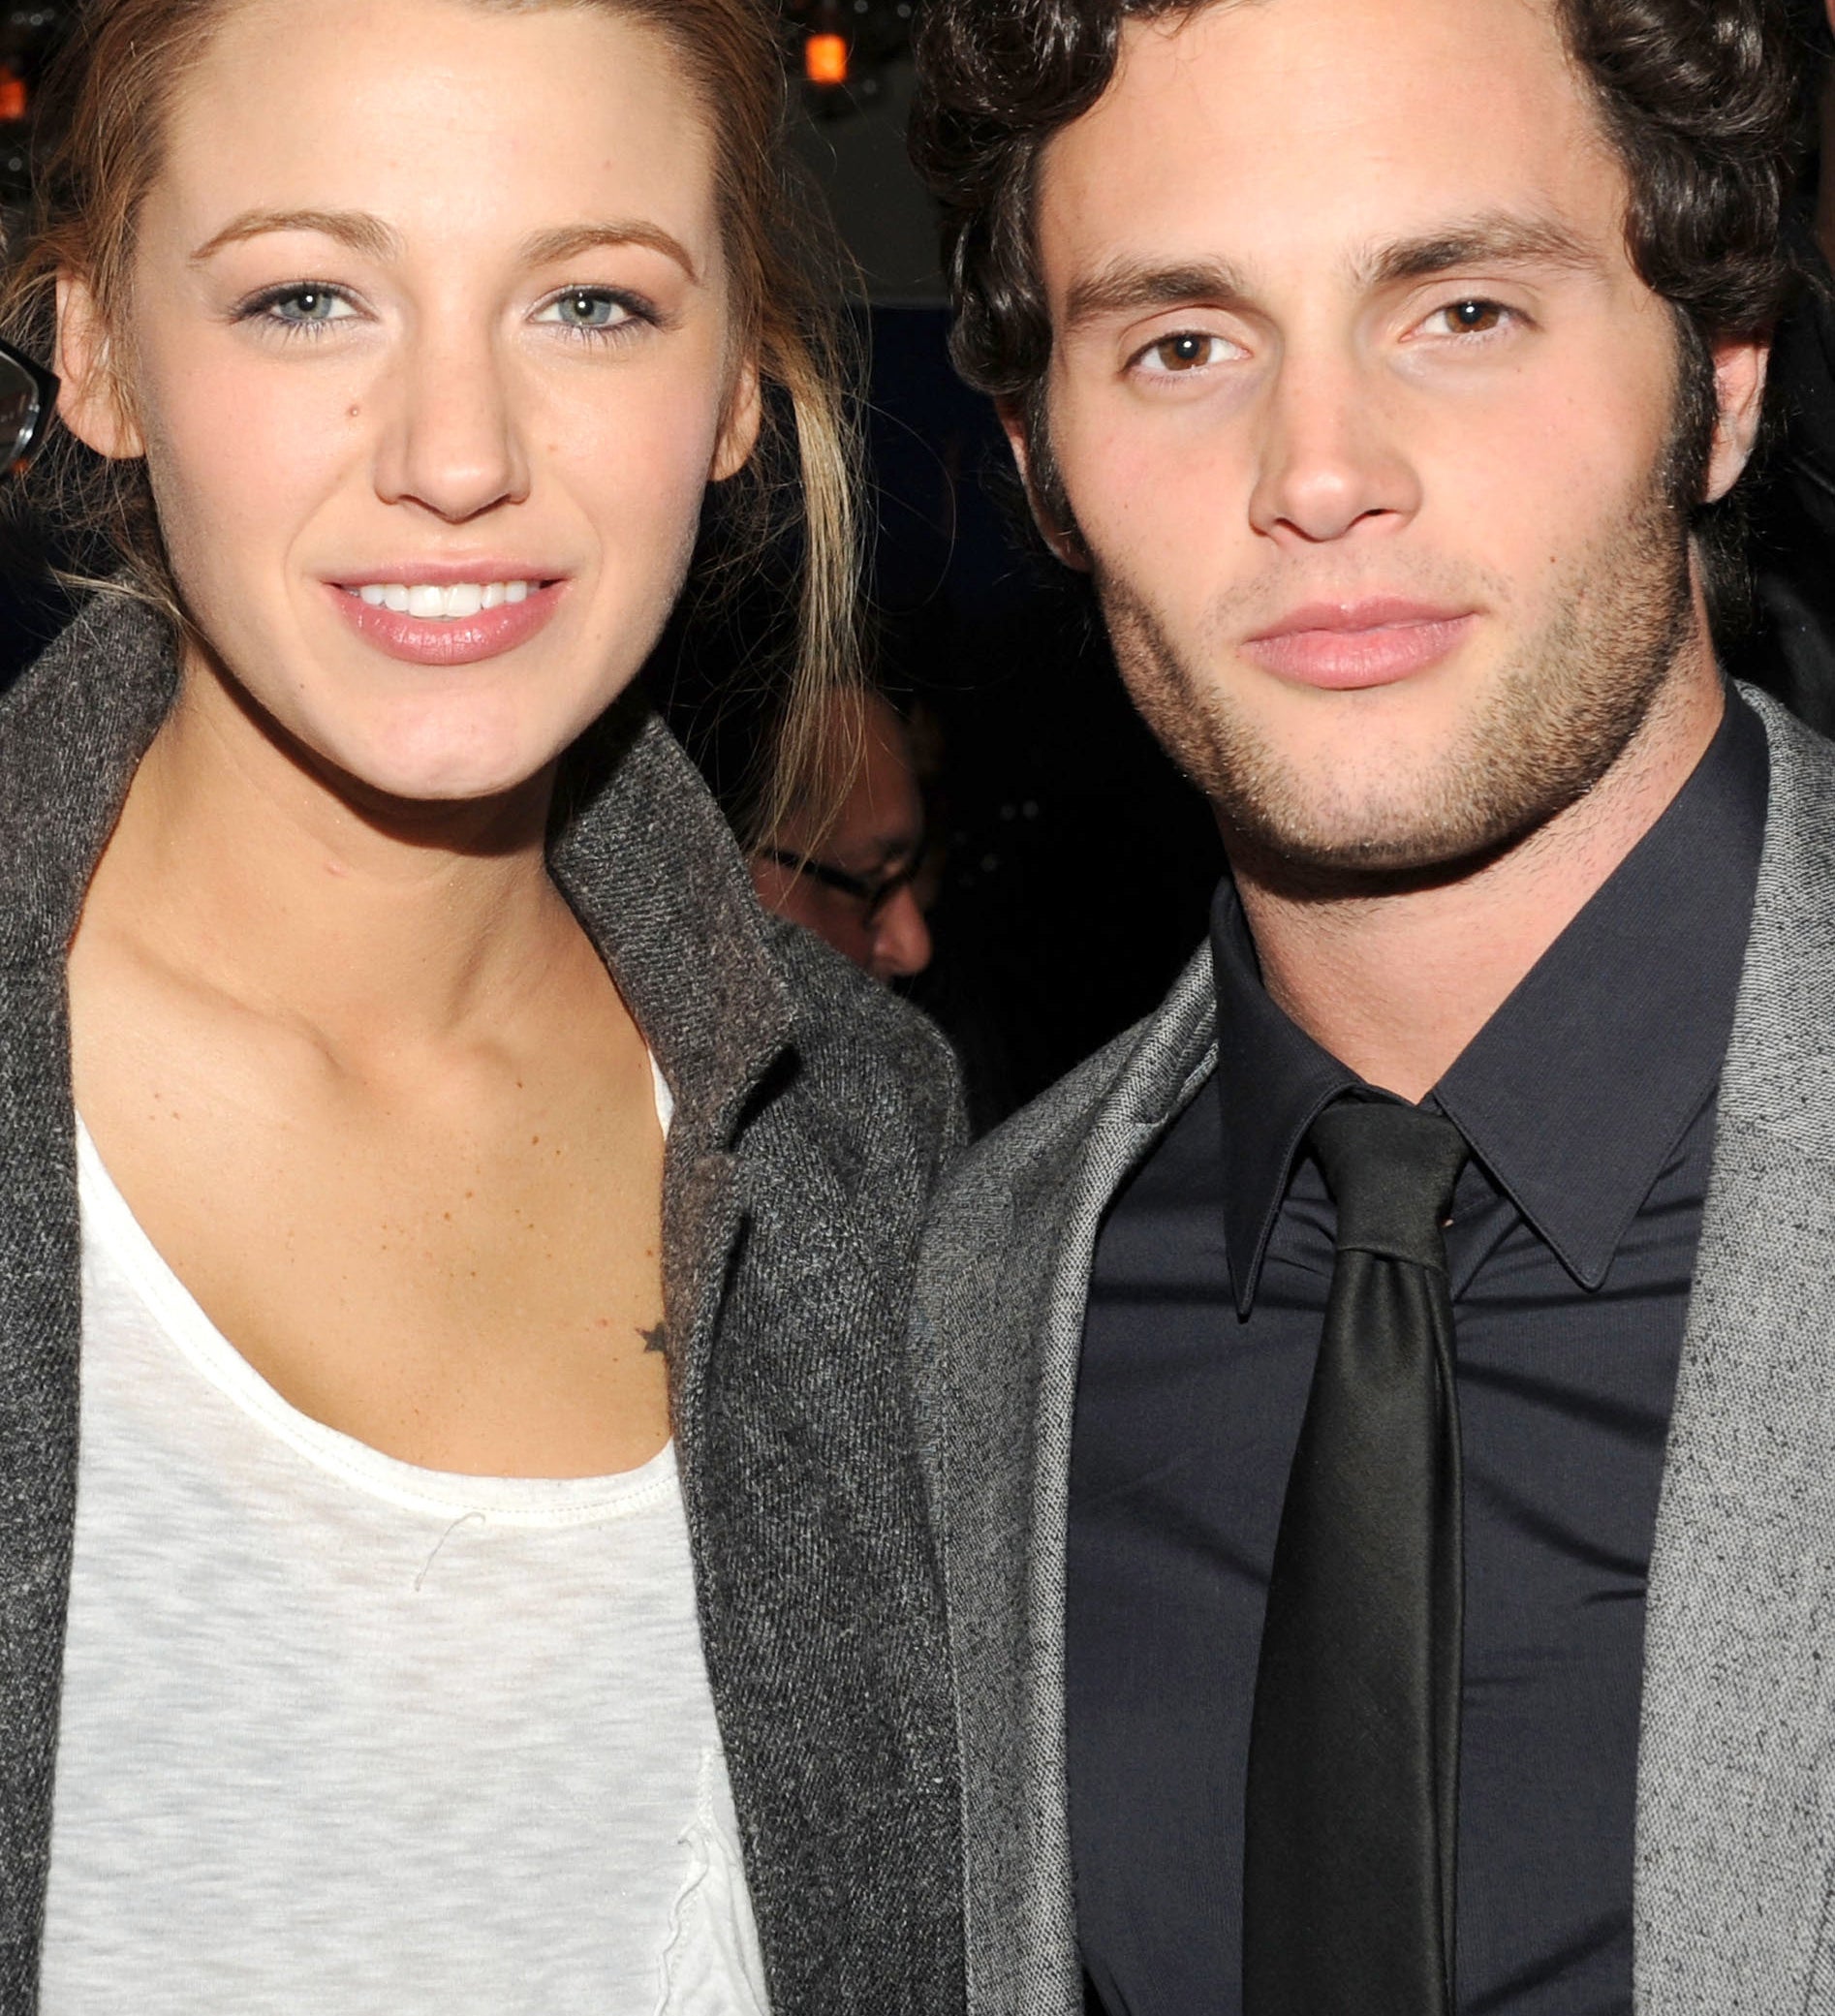 A photo of Blake Lively and Penn Badgley at event in 2010